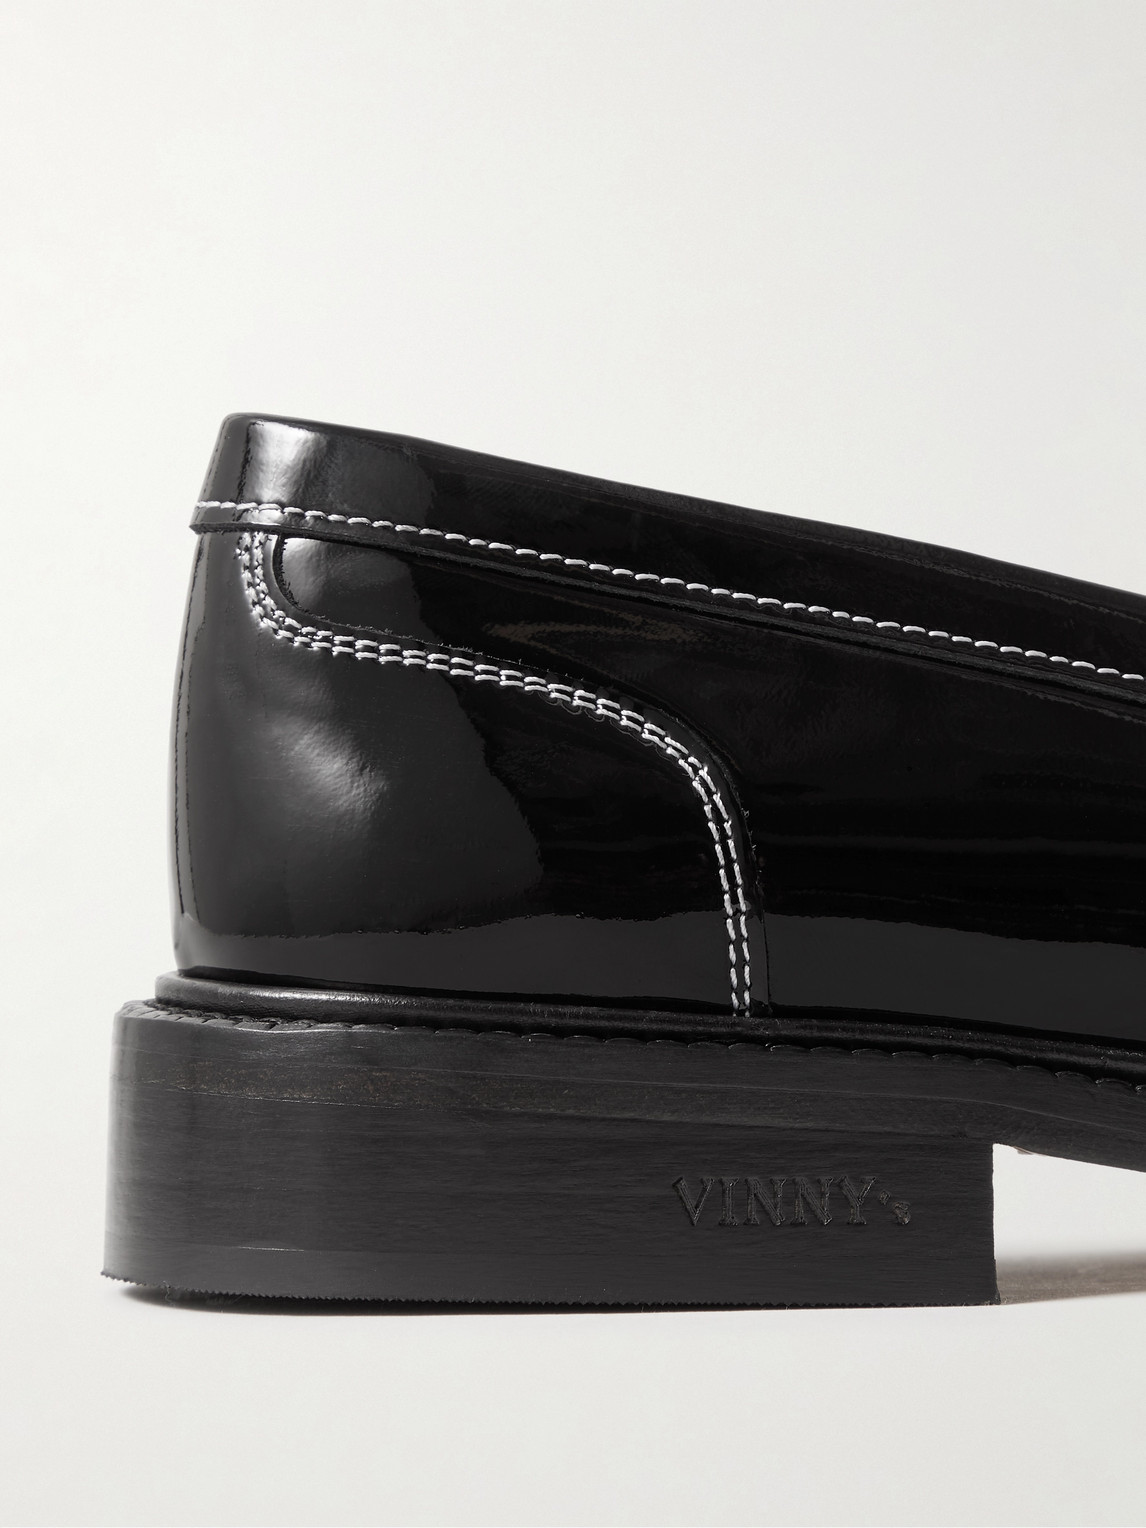 Shop Vinny's Townee Patent-leather Penny Loafers In Black